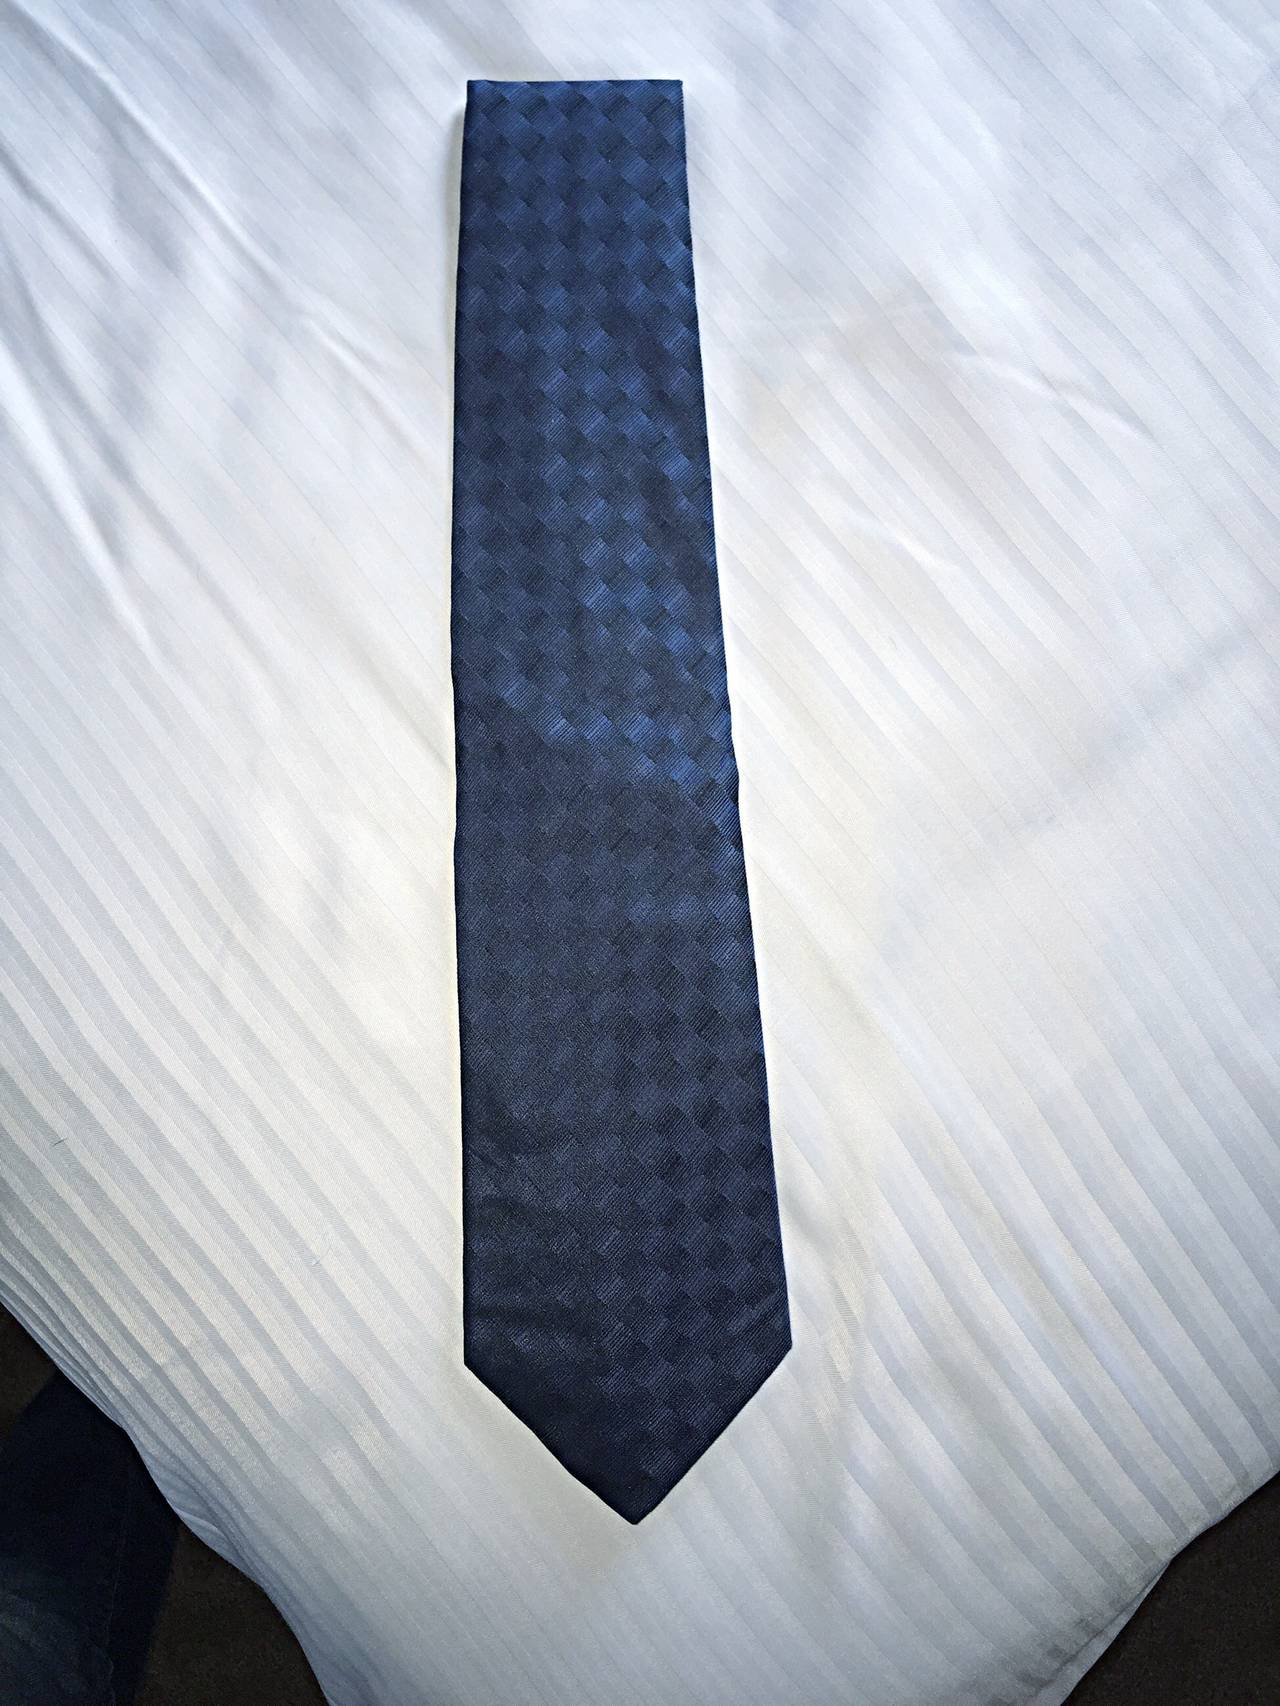 Handsome brand new Givenchy by Ricardo Tisci navy blue checkered tie! The perfect Father's Day gift, this tie features navy blue and black checks, with a slight sheen. 100% silk. Made in Italy. Brand new condition.